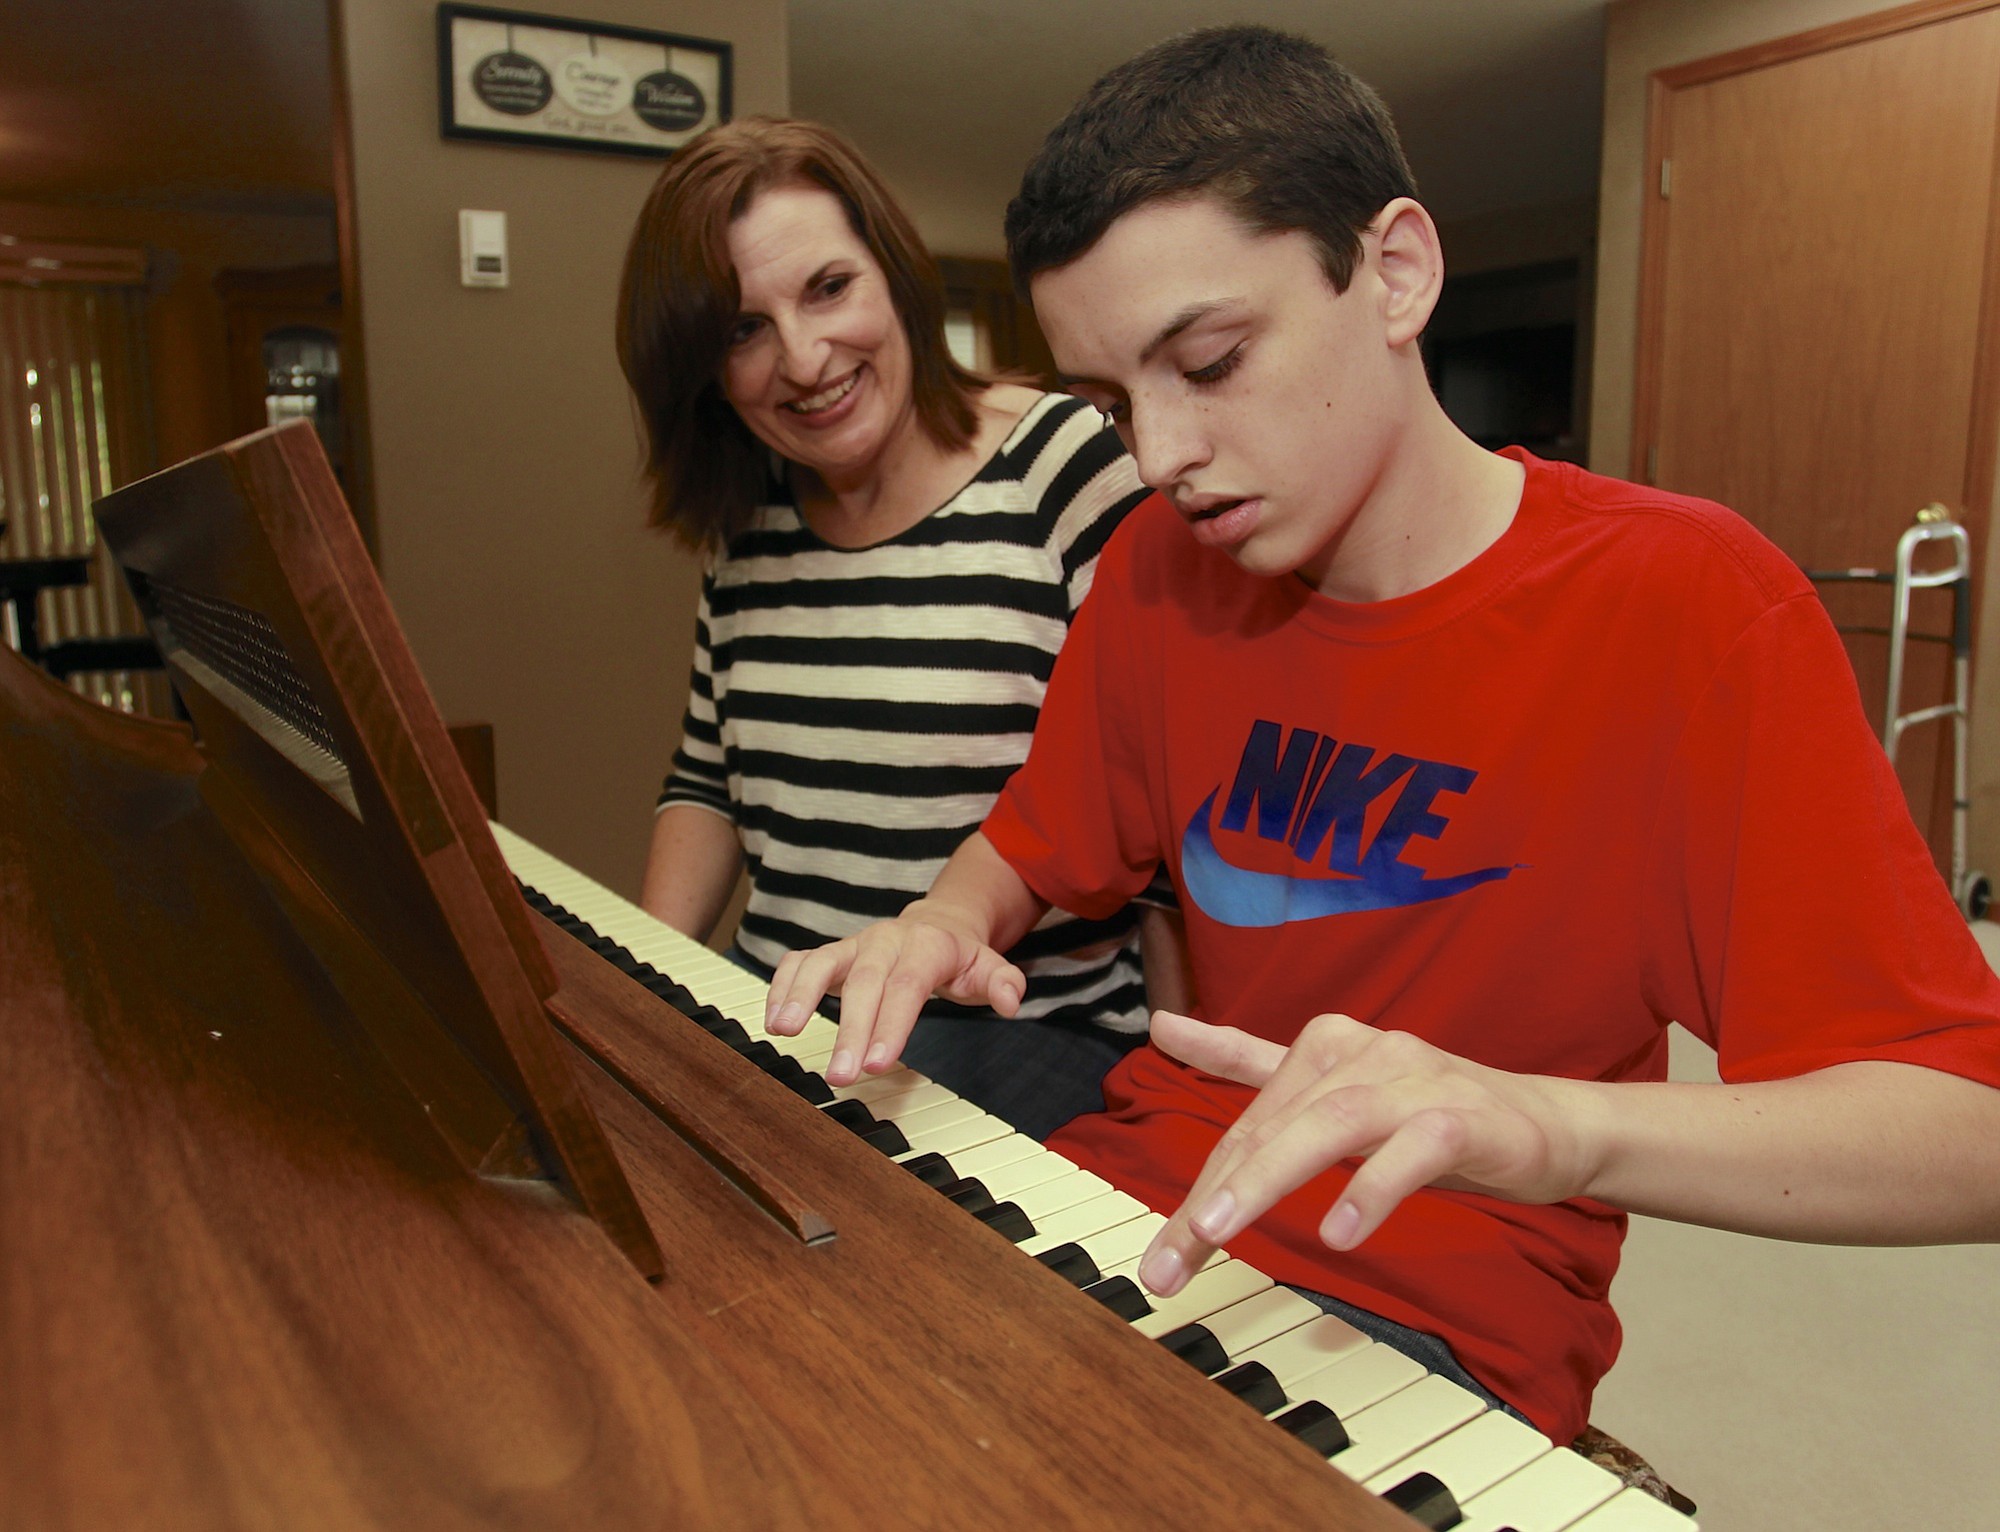 Steve Dipaola for The Columbian
Kari Sullivan watches her 14-year-old son, Nick, play Christmas songs on the piano at their east Vancouver home. Nick learns to play songs by ear.